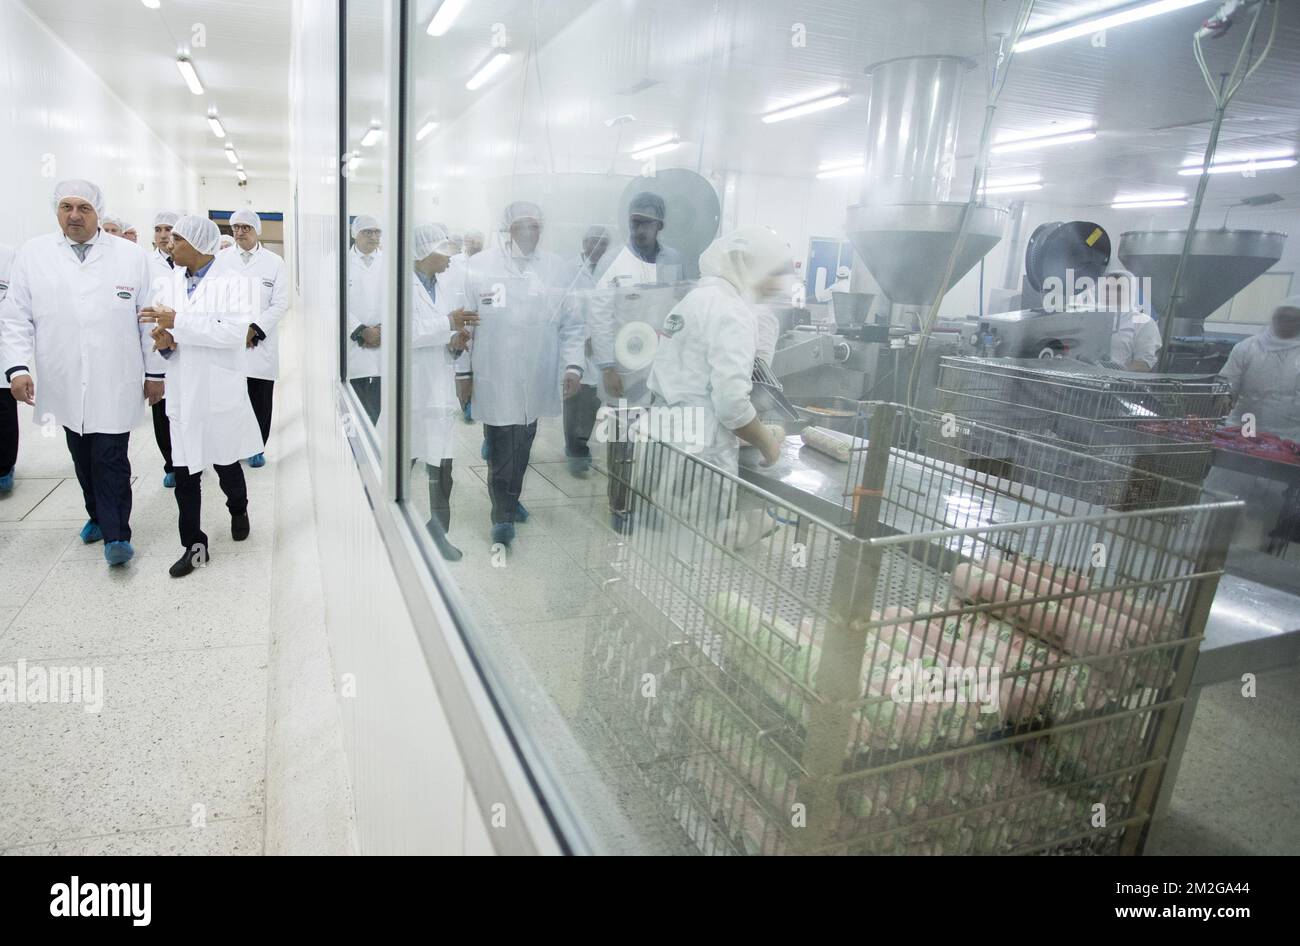 Walloon Minister President Willy Borsus pictured during a a visit to meat processing firm Koutoubia in Mohammedia, on the second day of a mission with Walloon minister-president Borsus to Morocco, Tuesday 26 June 2018. BELGA PHOTO BENOIT DOPPAGNE Stock Photo